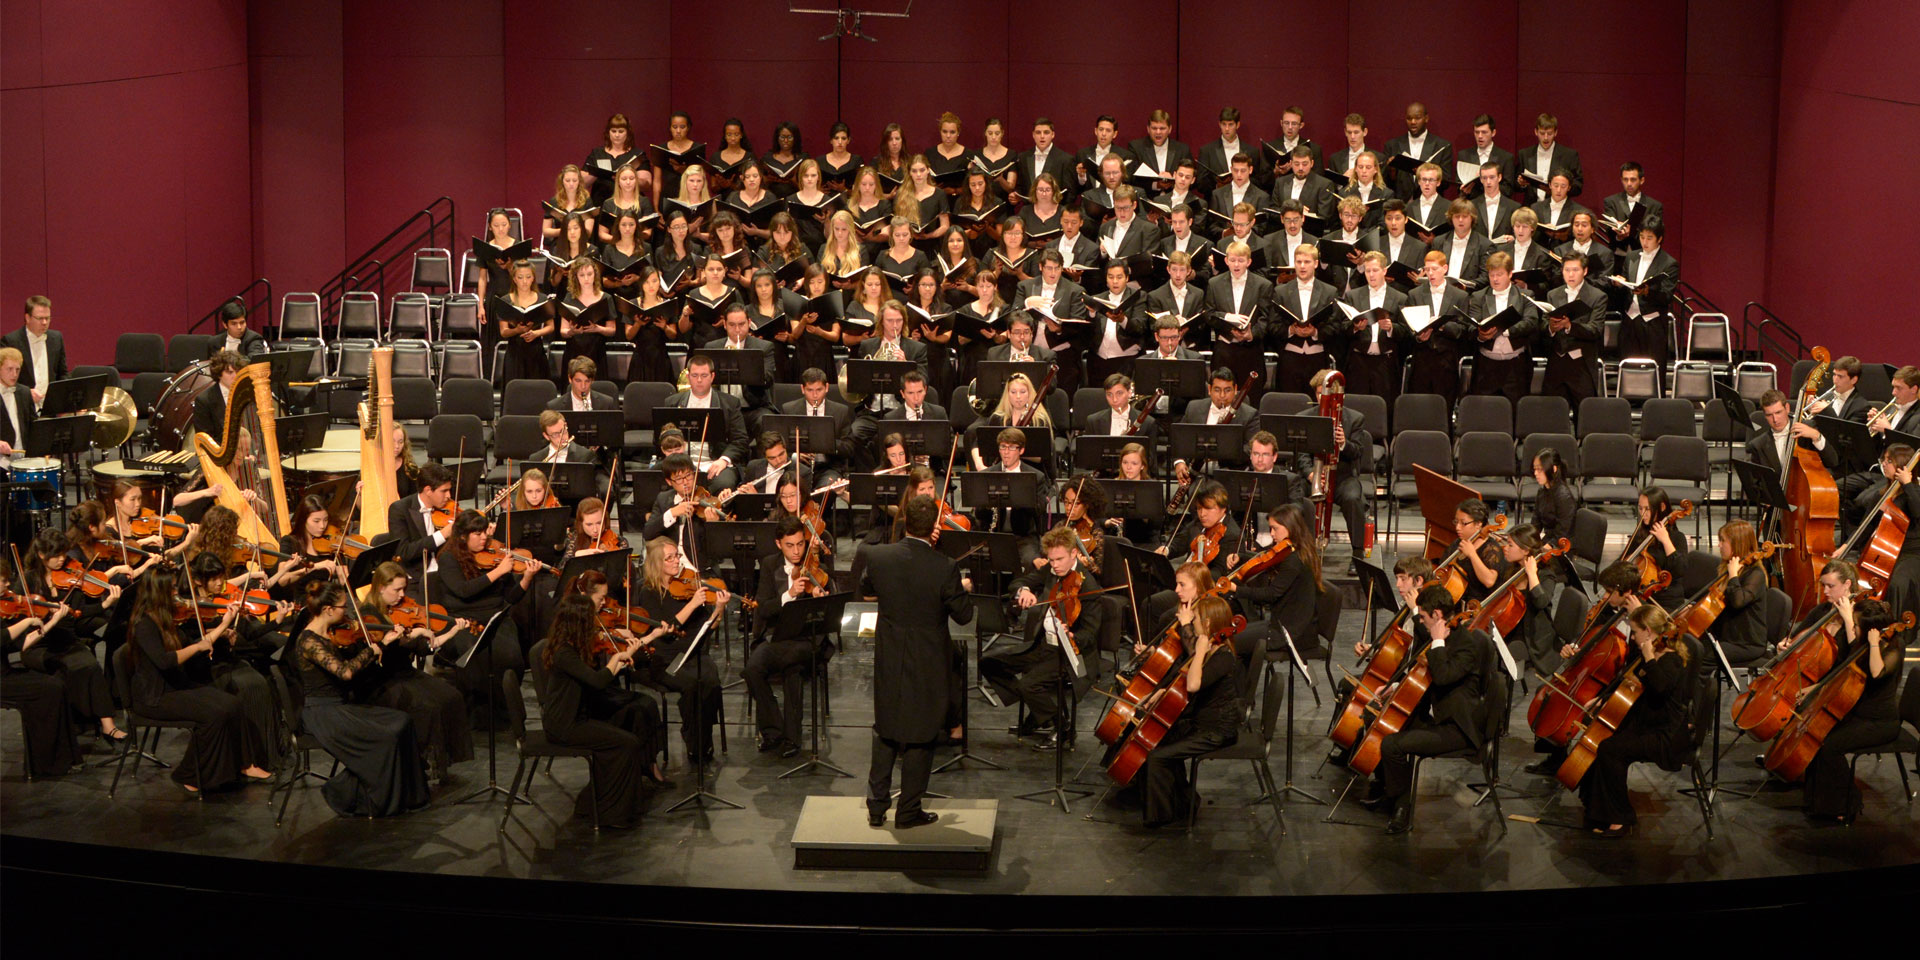 The Bob Cole Conservatory Symphony Orchestra on stage at the Carpenter Center